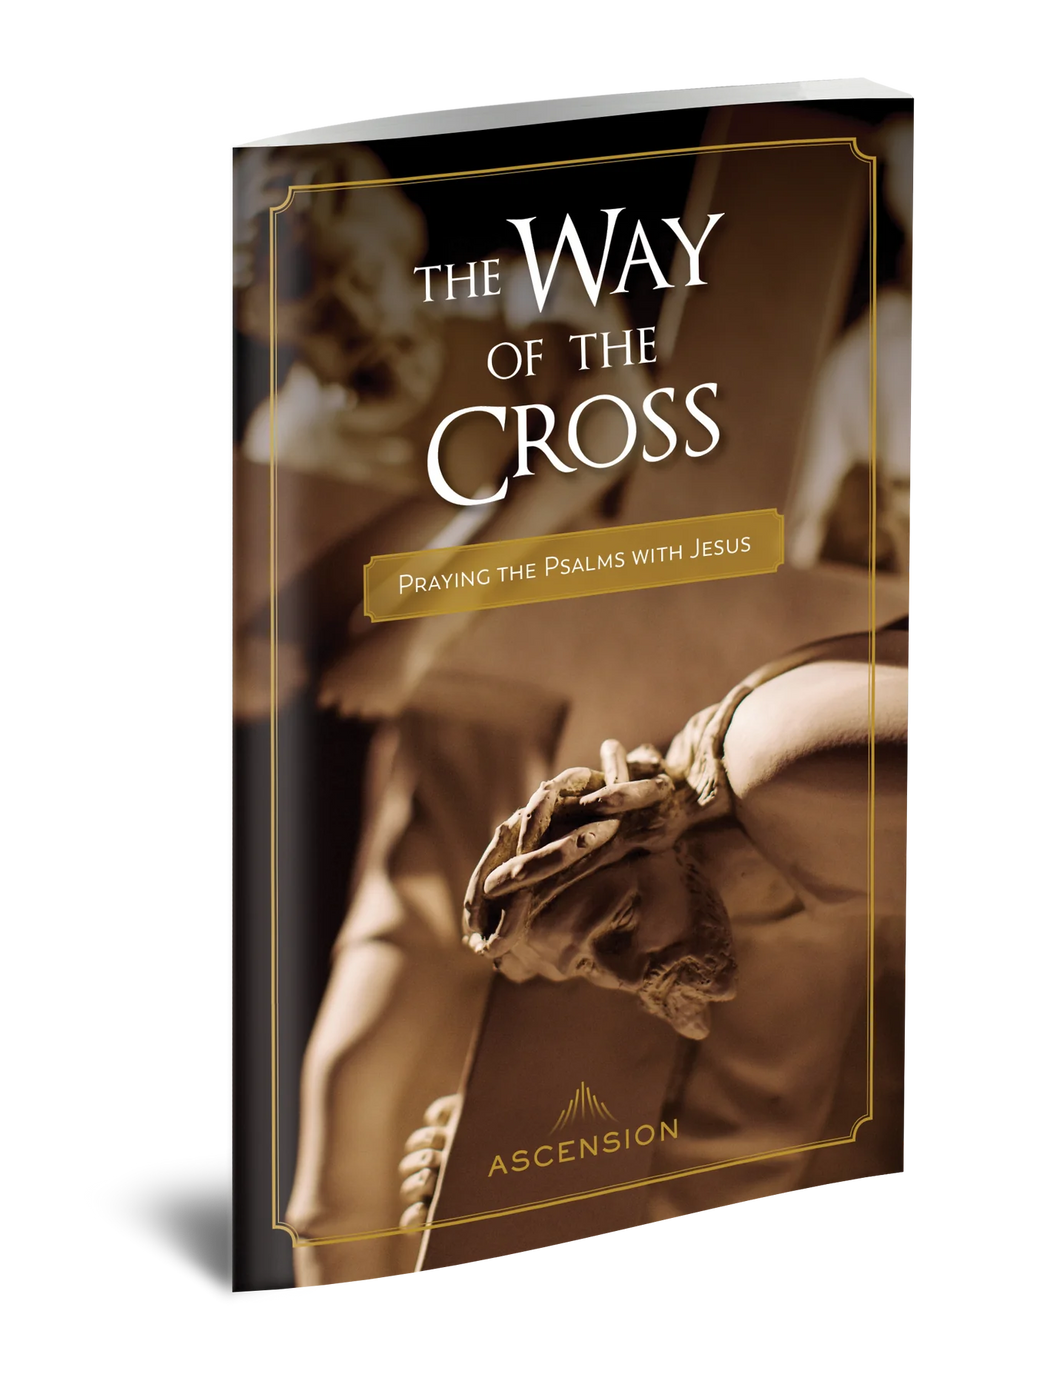 The Way of the Cross Praying with Psalms with Jesus